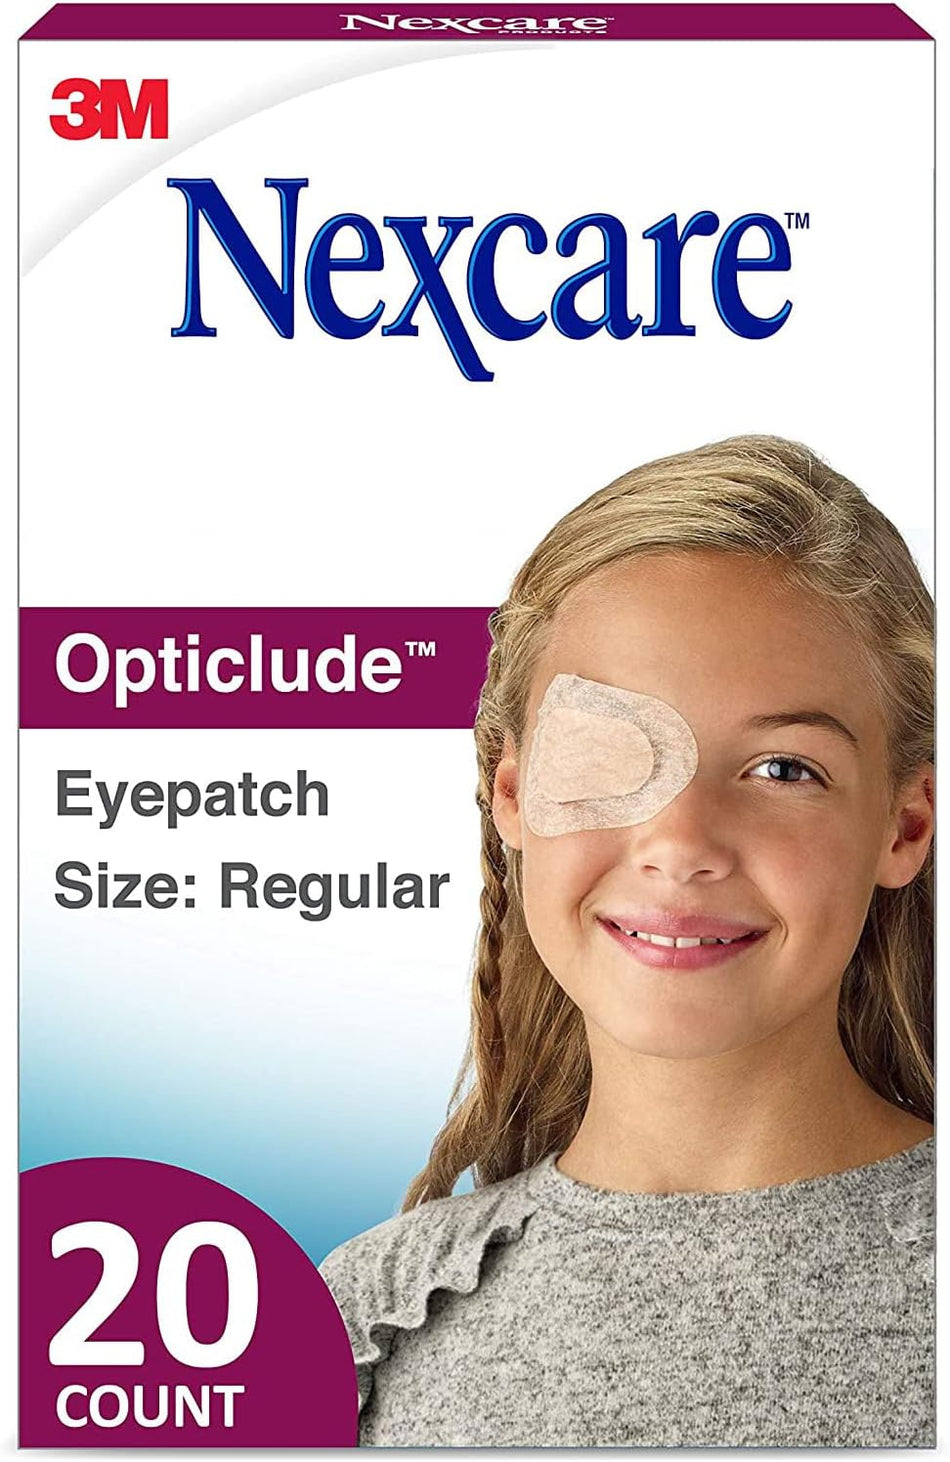 Code 1 Supply 3M 1537 Nexcare Opticlude Orthoptic Eye Patch Junior 2.44 in. x 1.8 in. (Box of 20)